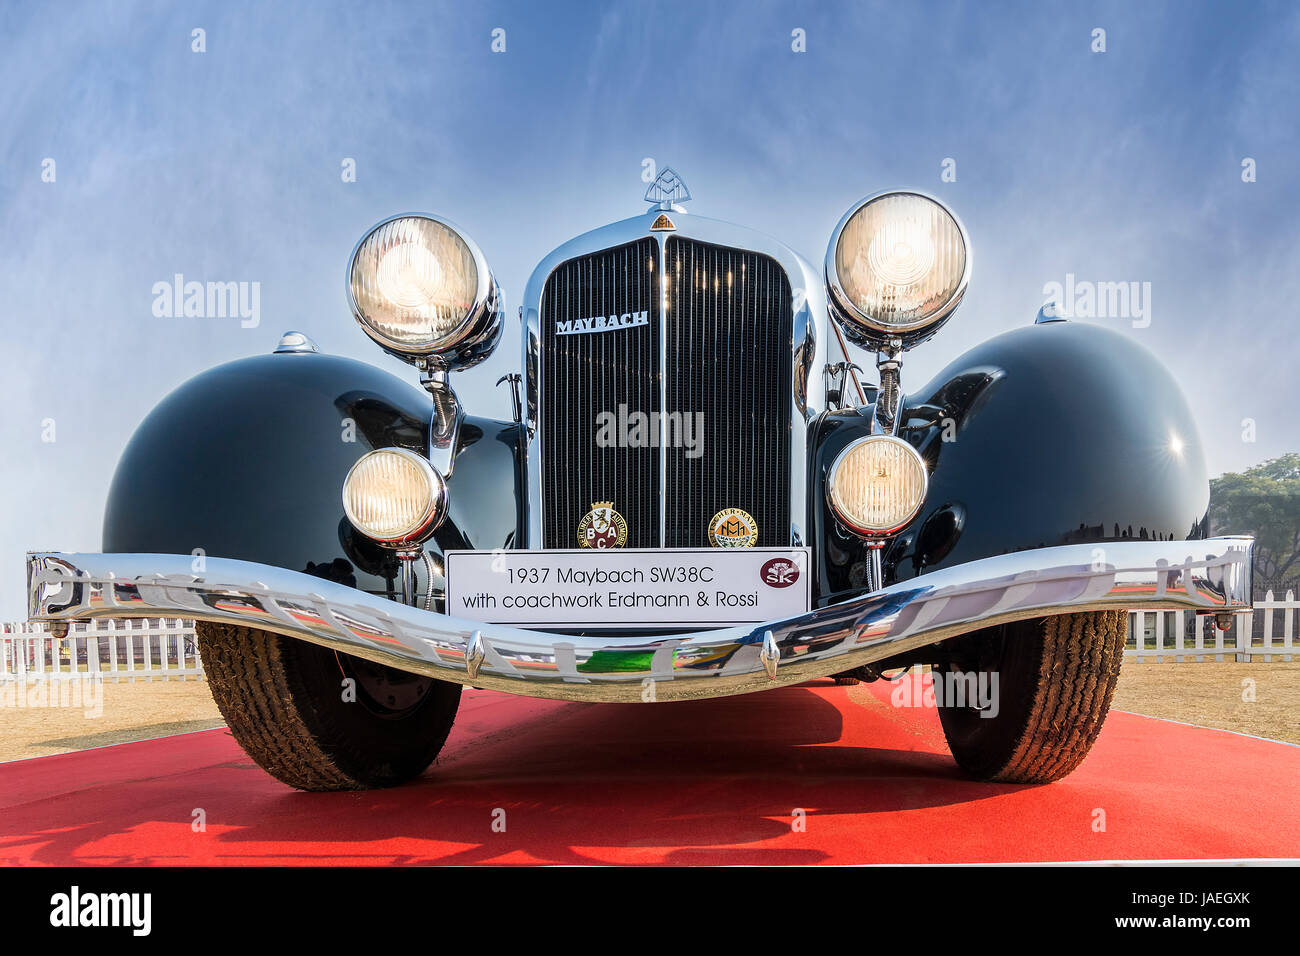 New Delhi, India - February 6, 2016: Front low angle view of beautiful vintage retro saloon Maybach SW38C (1937 model) parked at Red Fort, New Delhi.  Stock Photo